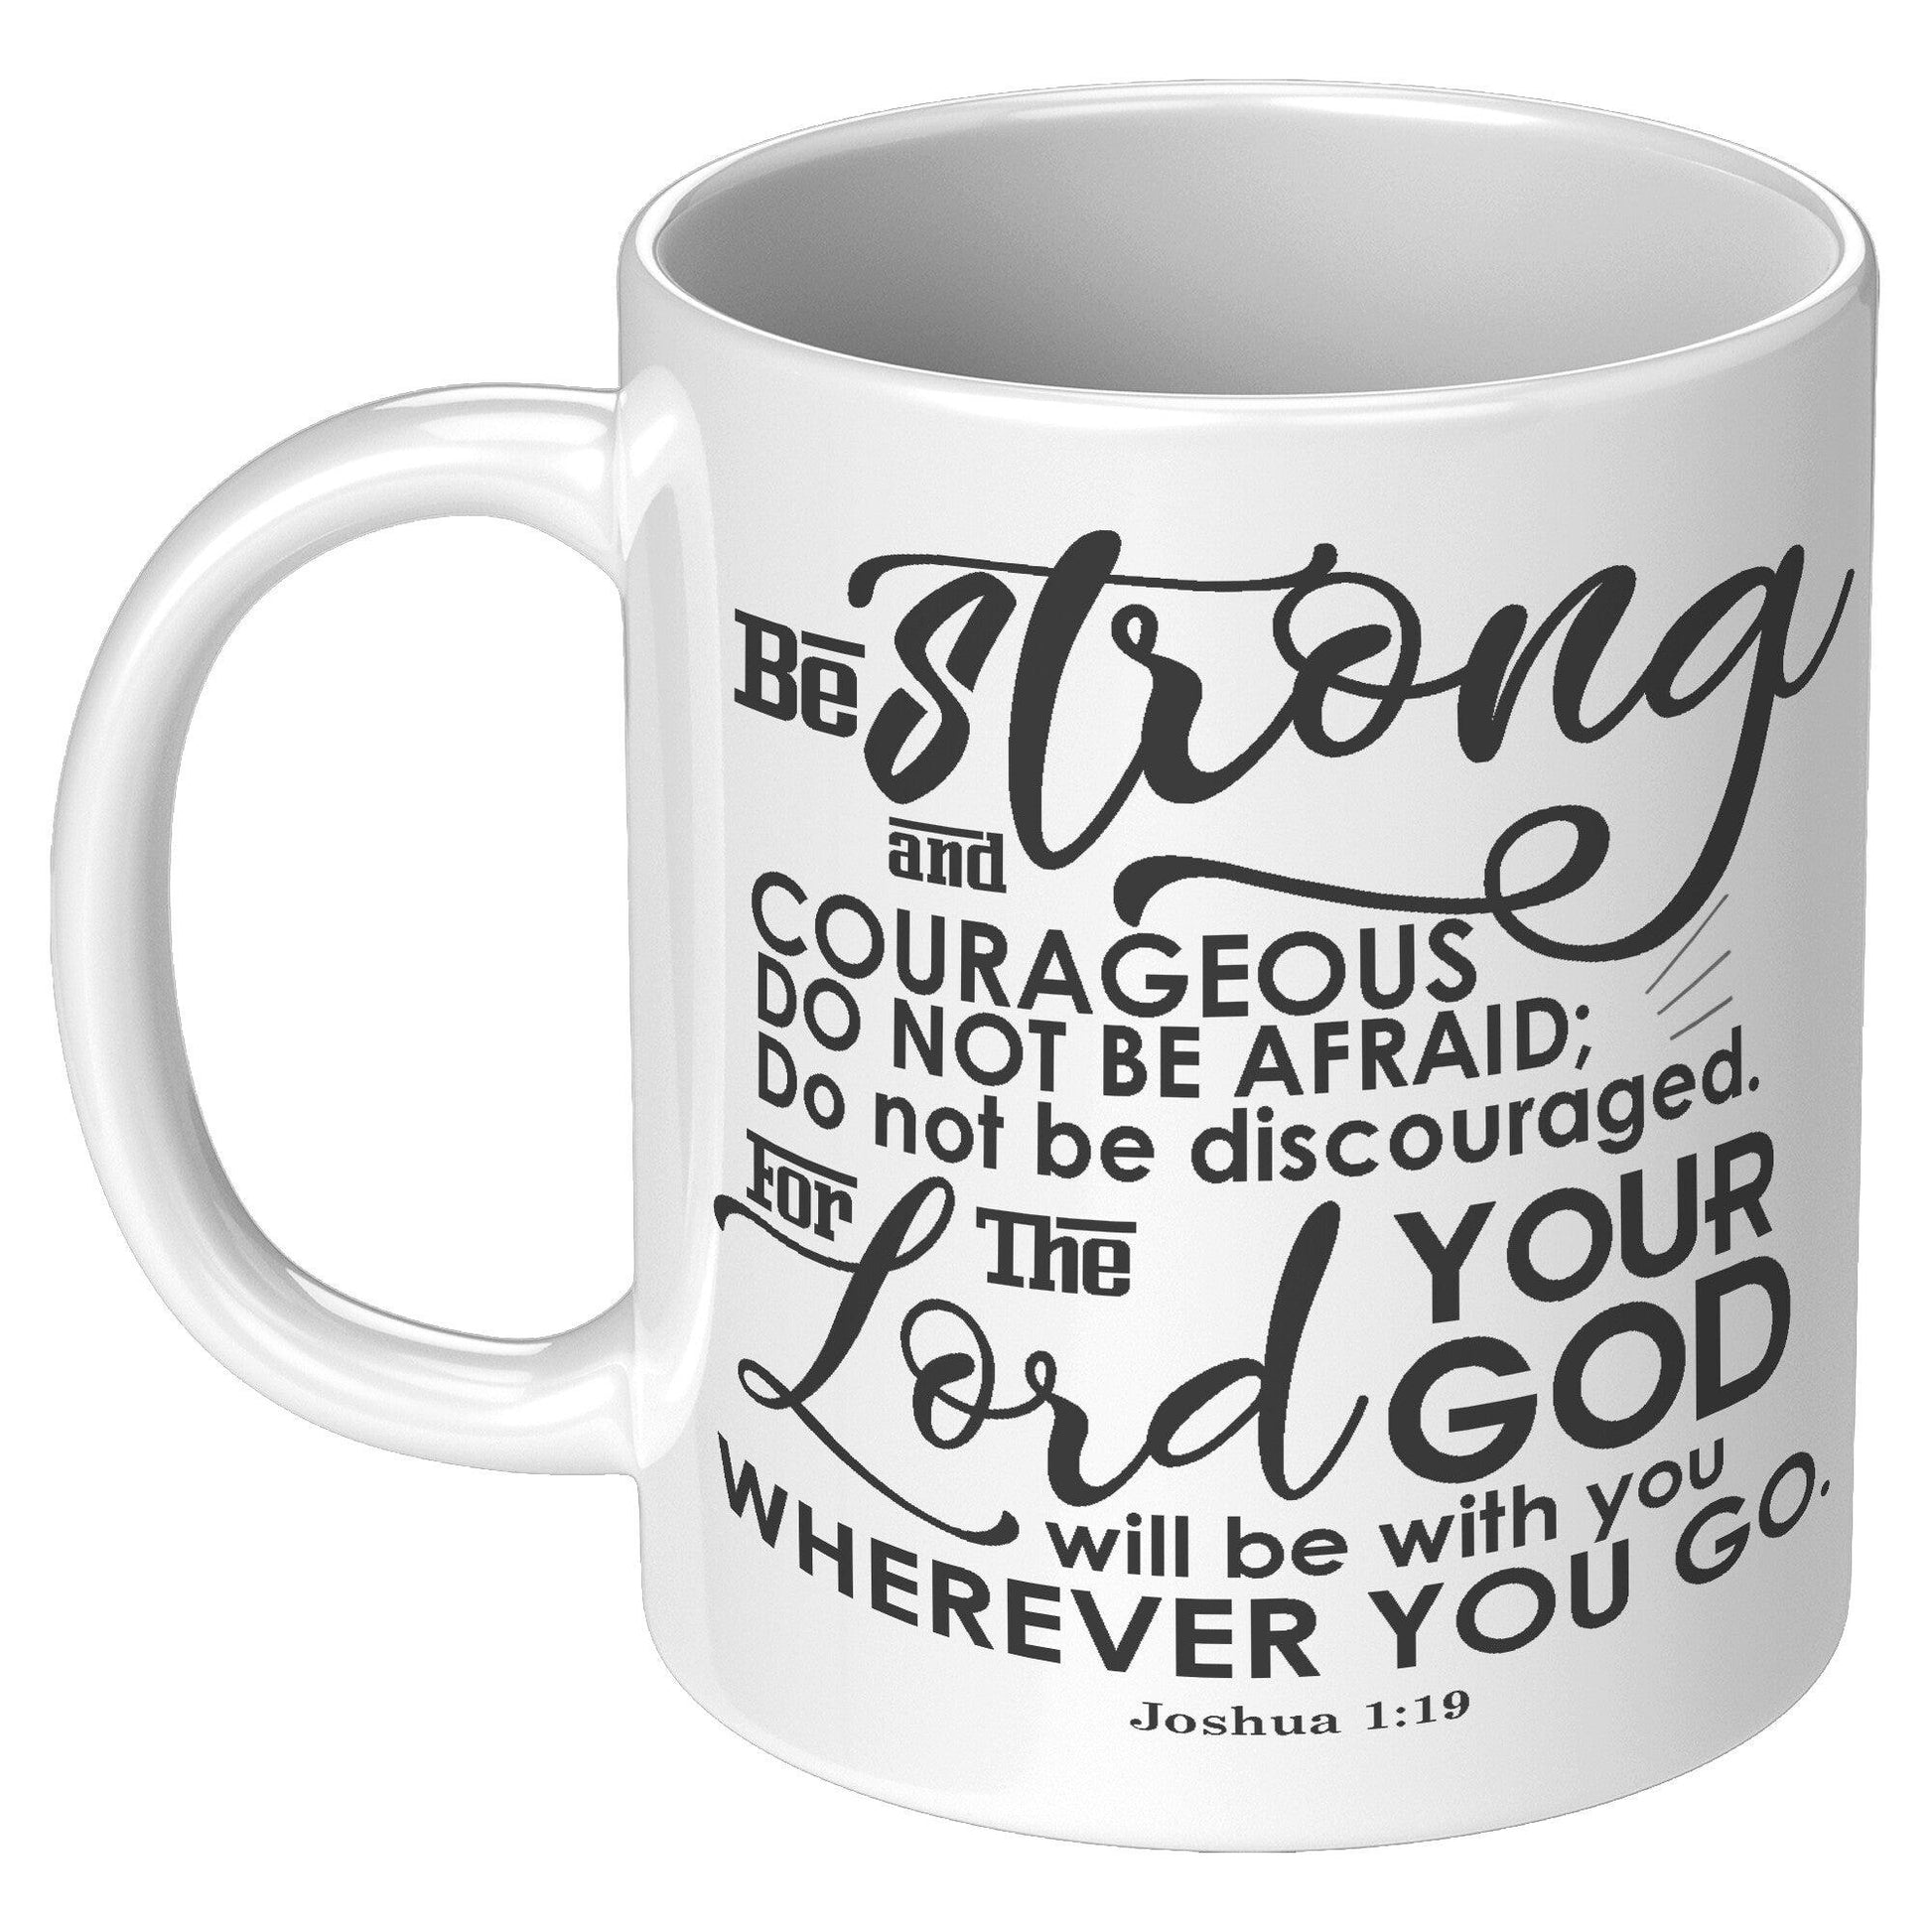 Be strong and courageous. Do not be afraid; do not be discouraged, for the Lord your God will be with you wherever you go • Joshua 1:9 • Coffee Mug Gift • White Mug - TheGivenGet